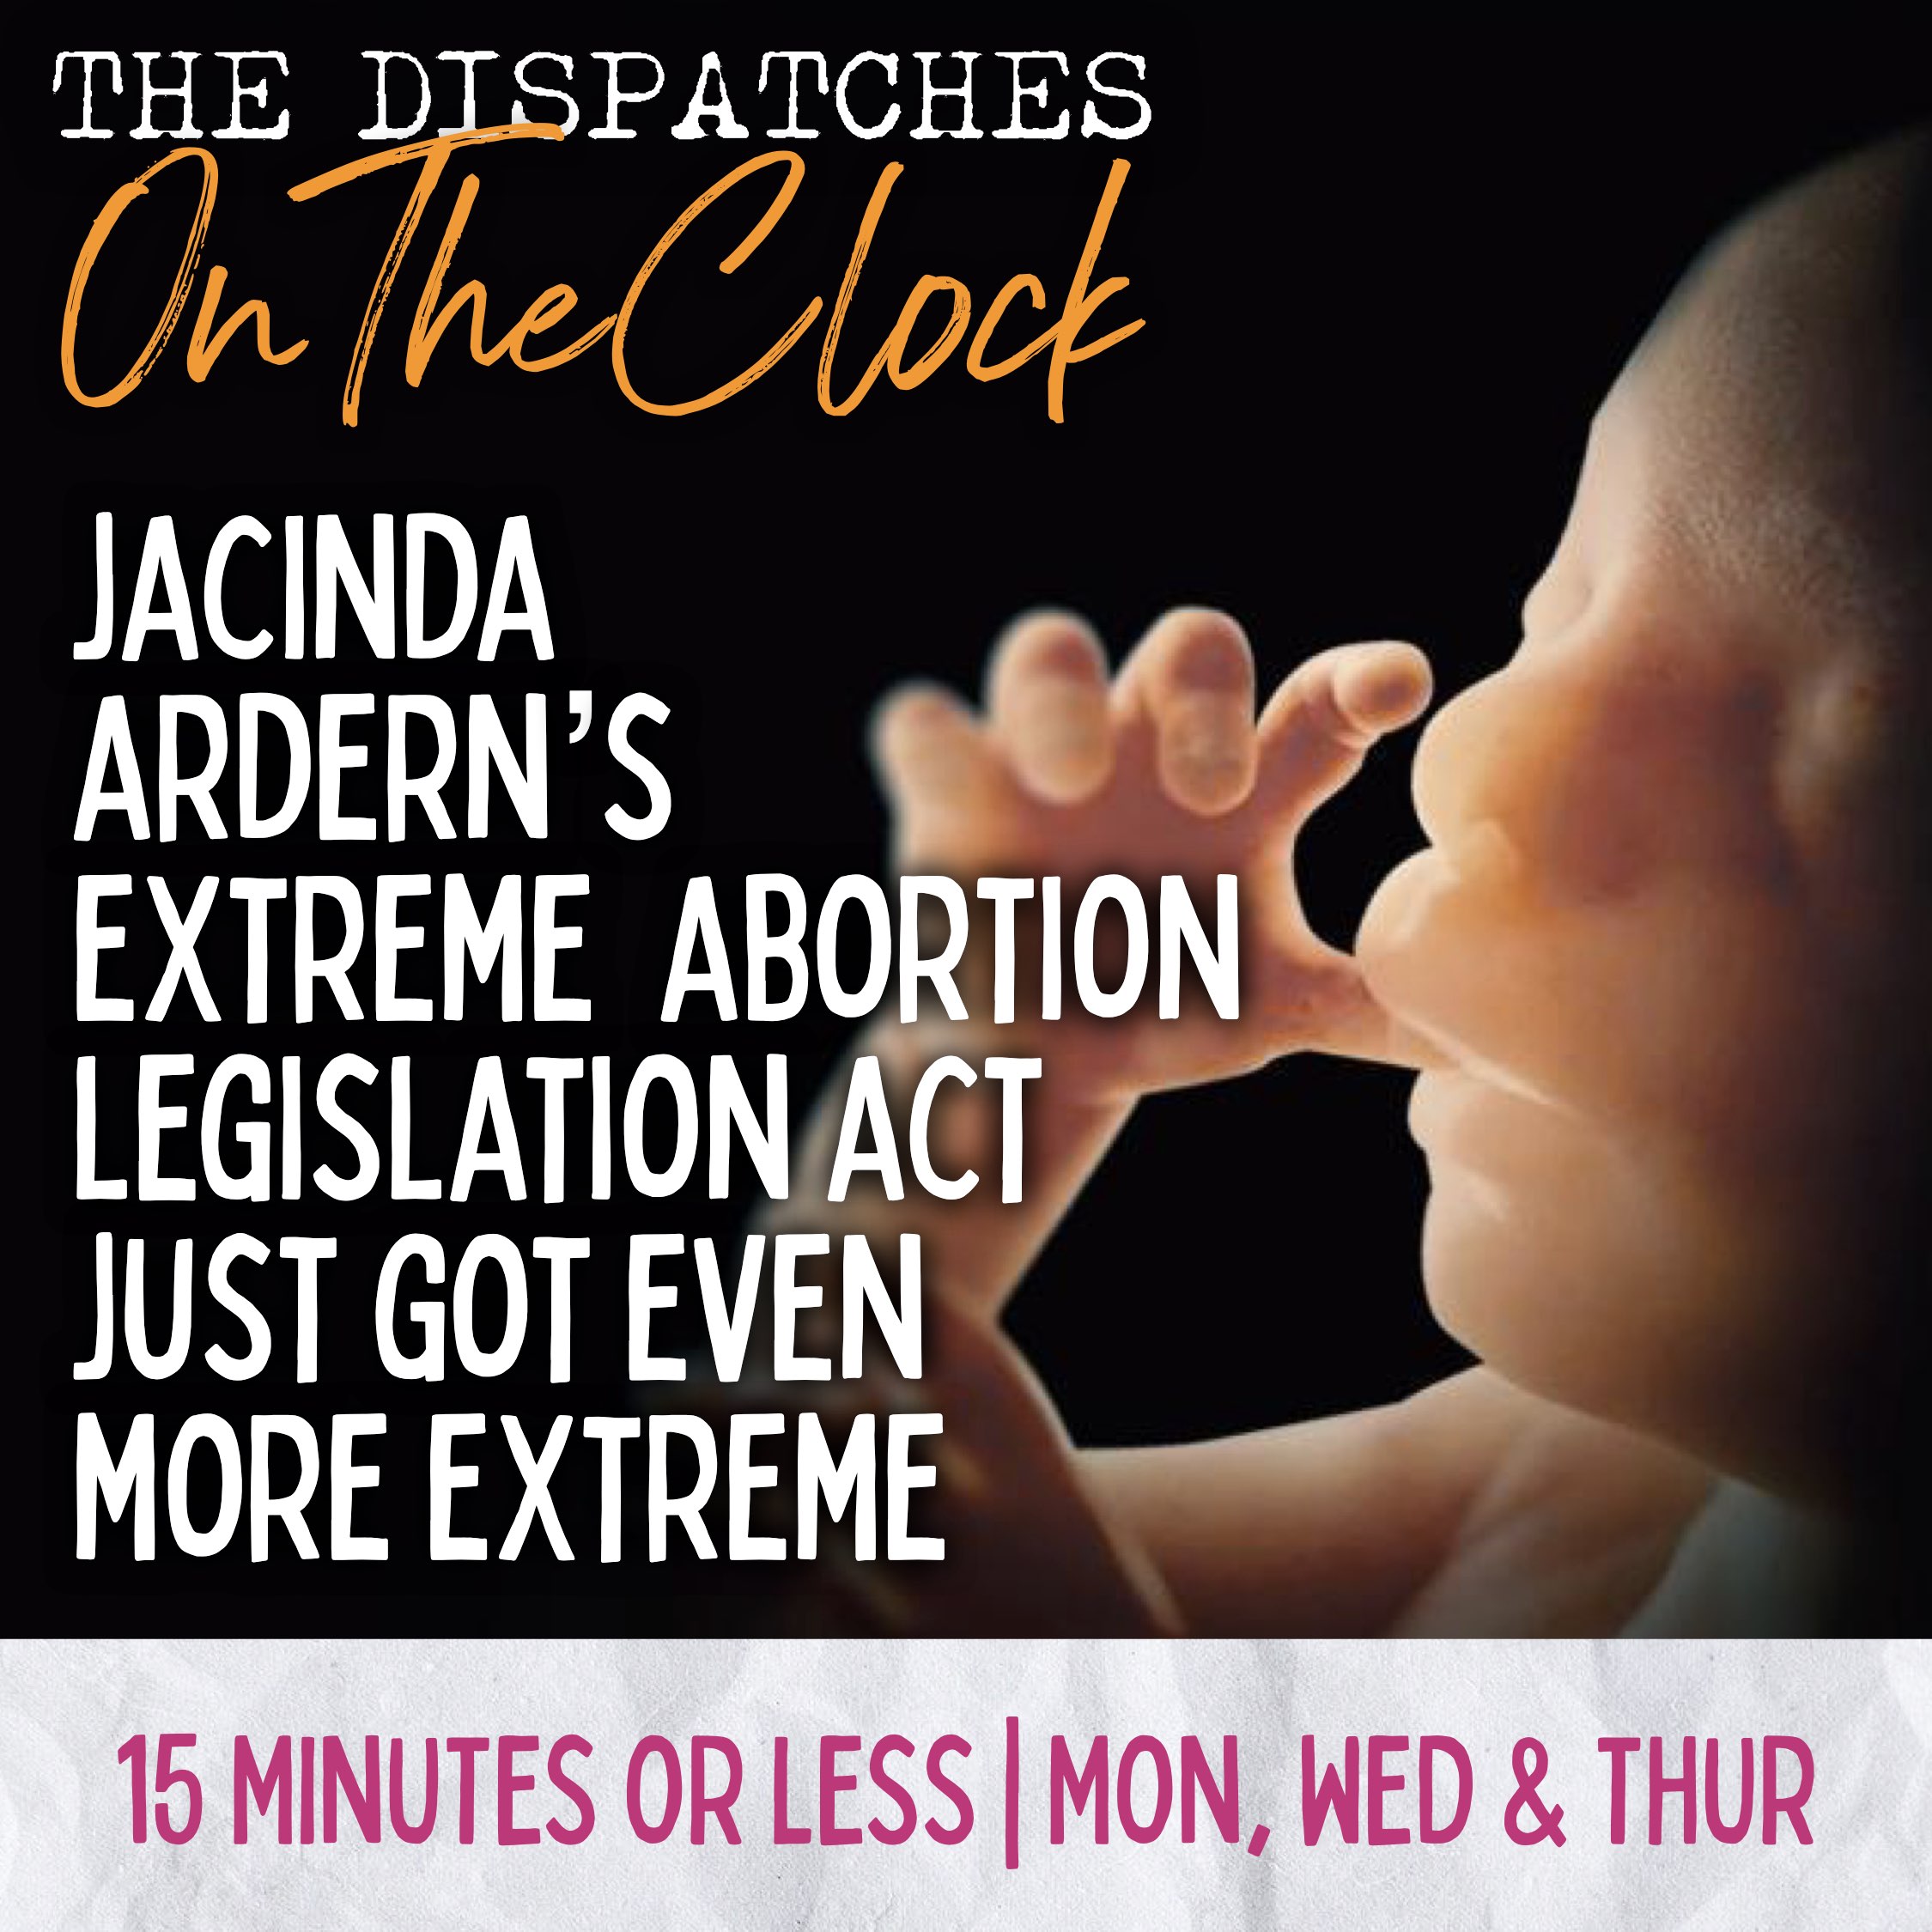 ON THE CLOCK | Jacinda Ardern’s Extreme Abortion Legislation Act Just Got Even More Extreme